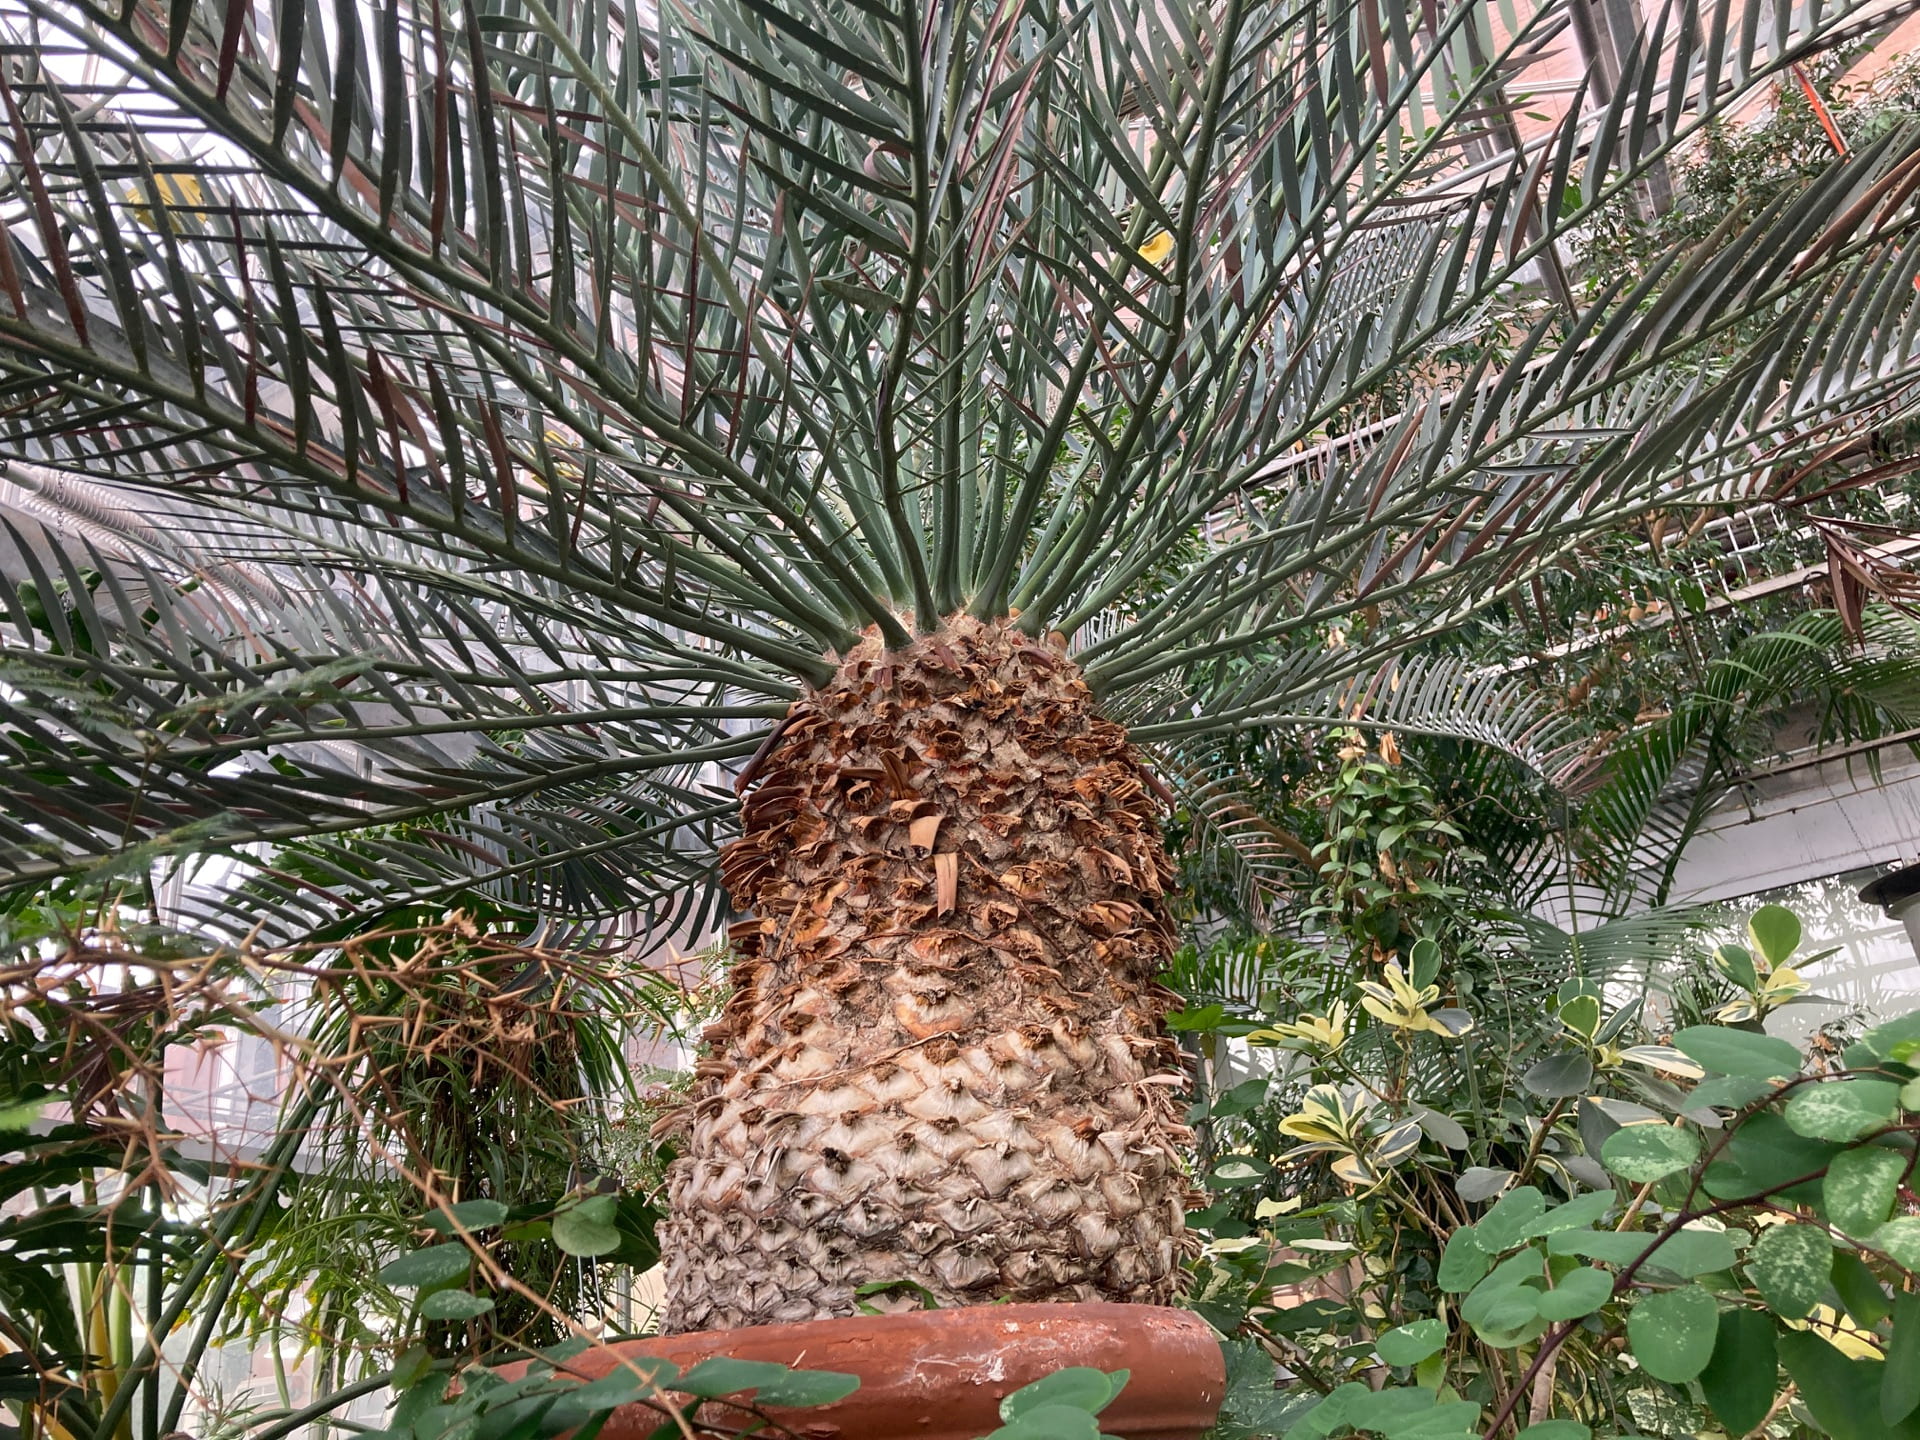 Our Karoo cycad, Encephalartos lehmannii, is the oldest plant in the greenhouse, well over 100 years old. It is a gymnosperm, producing a naked seed.